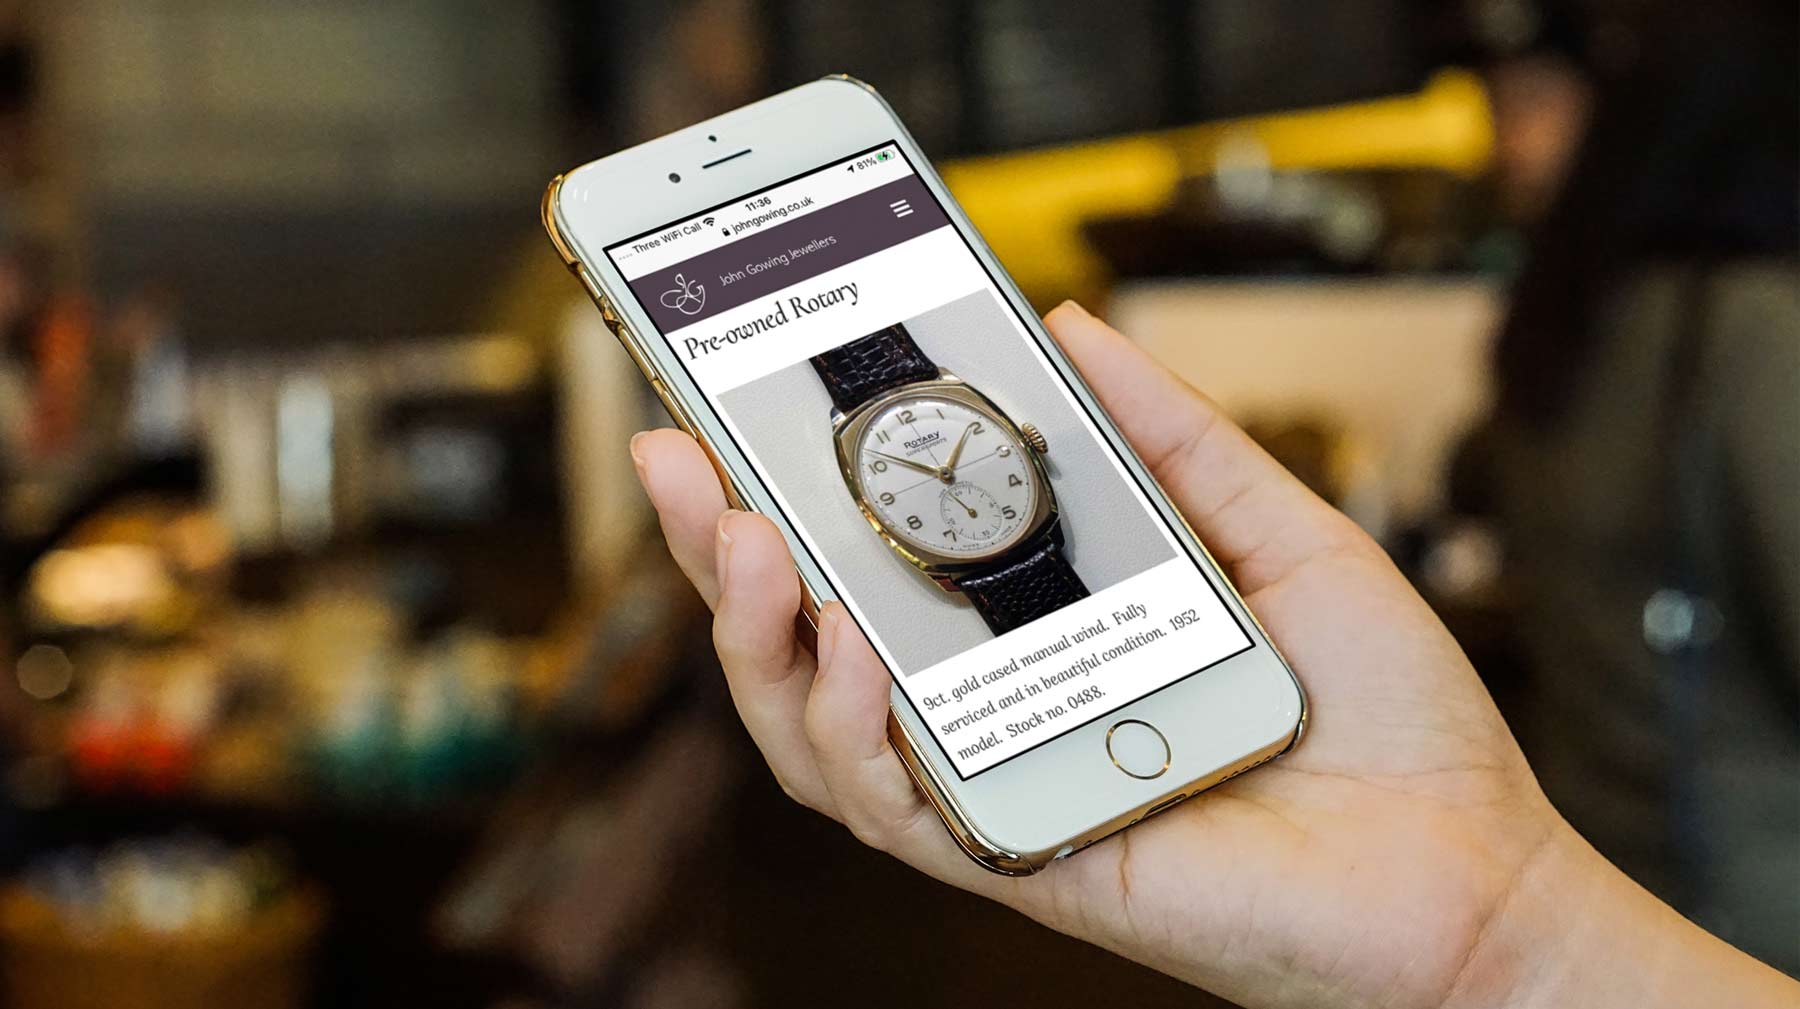 A product on the John Gowing Jewellery website displayed on a smartphone